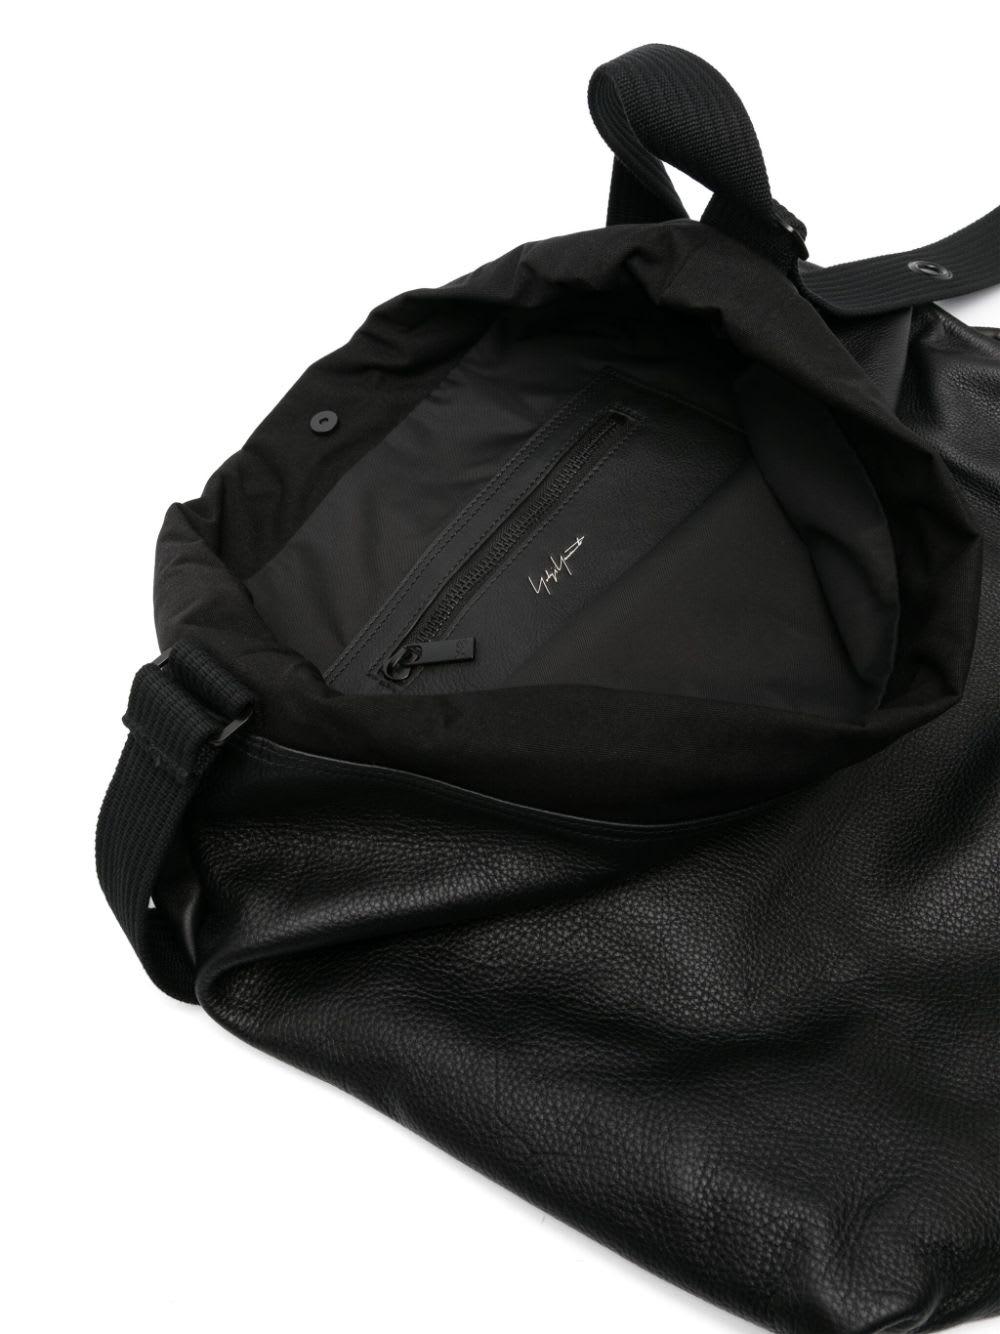 Y-3 Lux Leather Bag